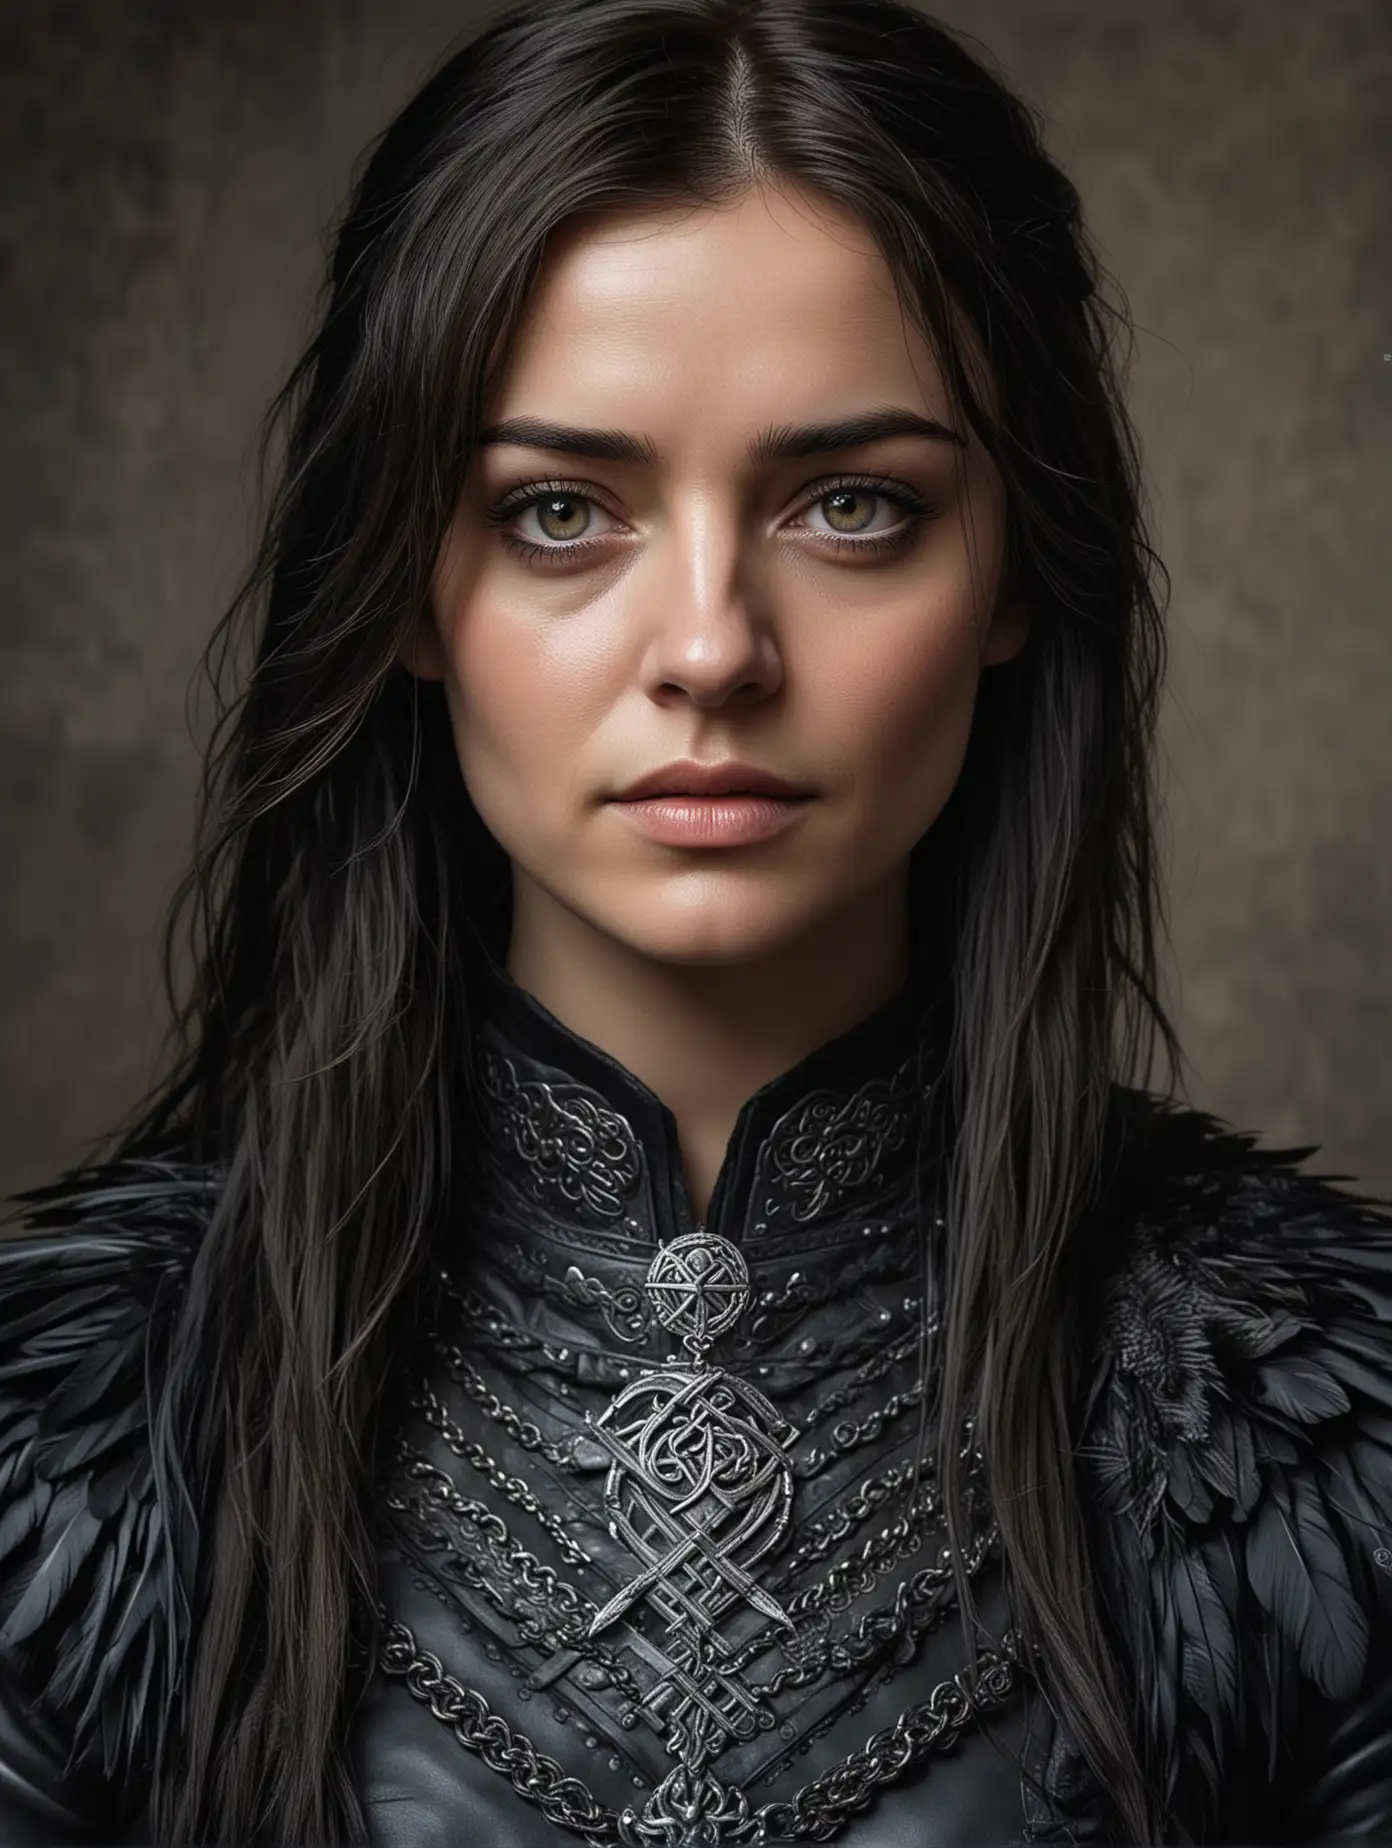 close up portrait of a mature 30 year old Arya Stark, game of thrones, detailed light grey eyes, long black hair, black feathers, black clothes and leather armour, tribal, celtic, necklaces, hyperrealistic painting inspired by lee jeffries, zbrush central contest winner, hyperrealism, steven mccurry portrait, photography alexey gurylev, alessio albi